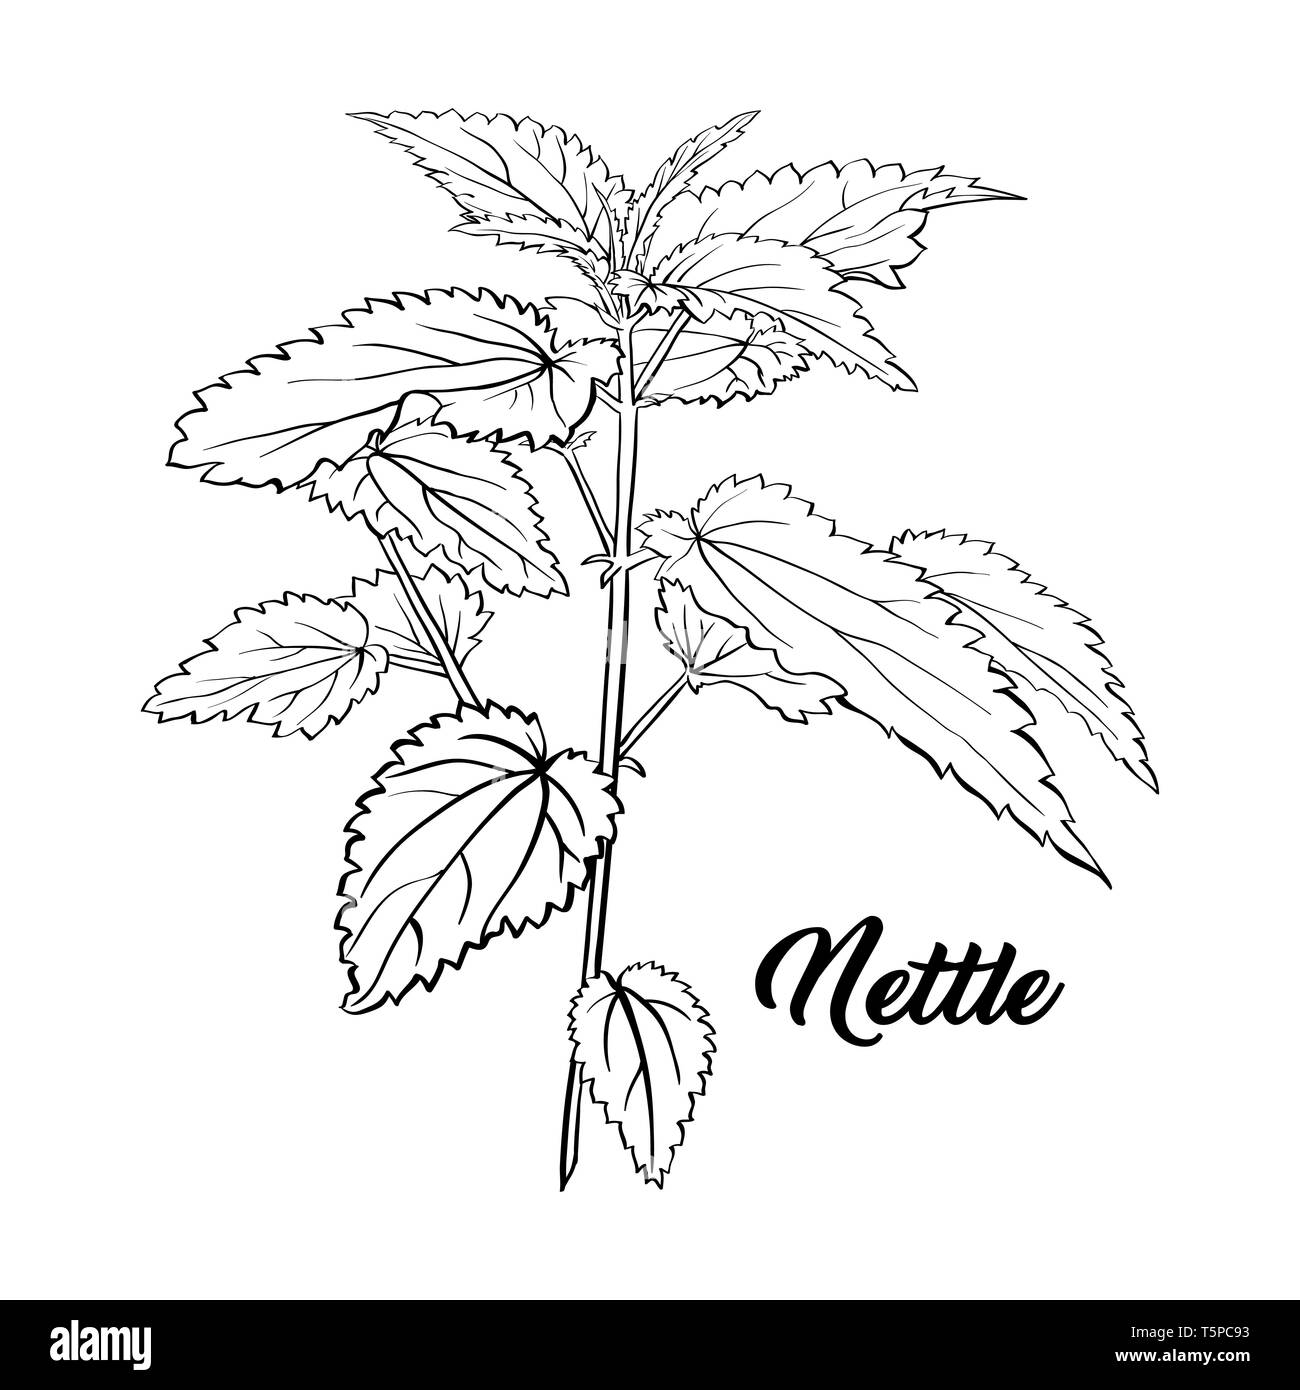 Nettle Branch Monochrome Engraving. Tea Herb Sketch. Isolated Hand Drawn Contour Sketch Drawing Illustration of Stinning Botany Plant. Herbal Medicine and Aromatherapy Design on the White Background Stock Vector